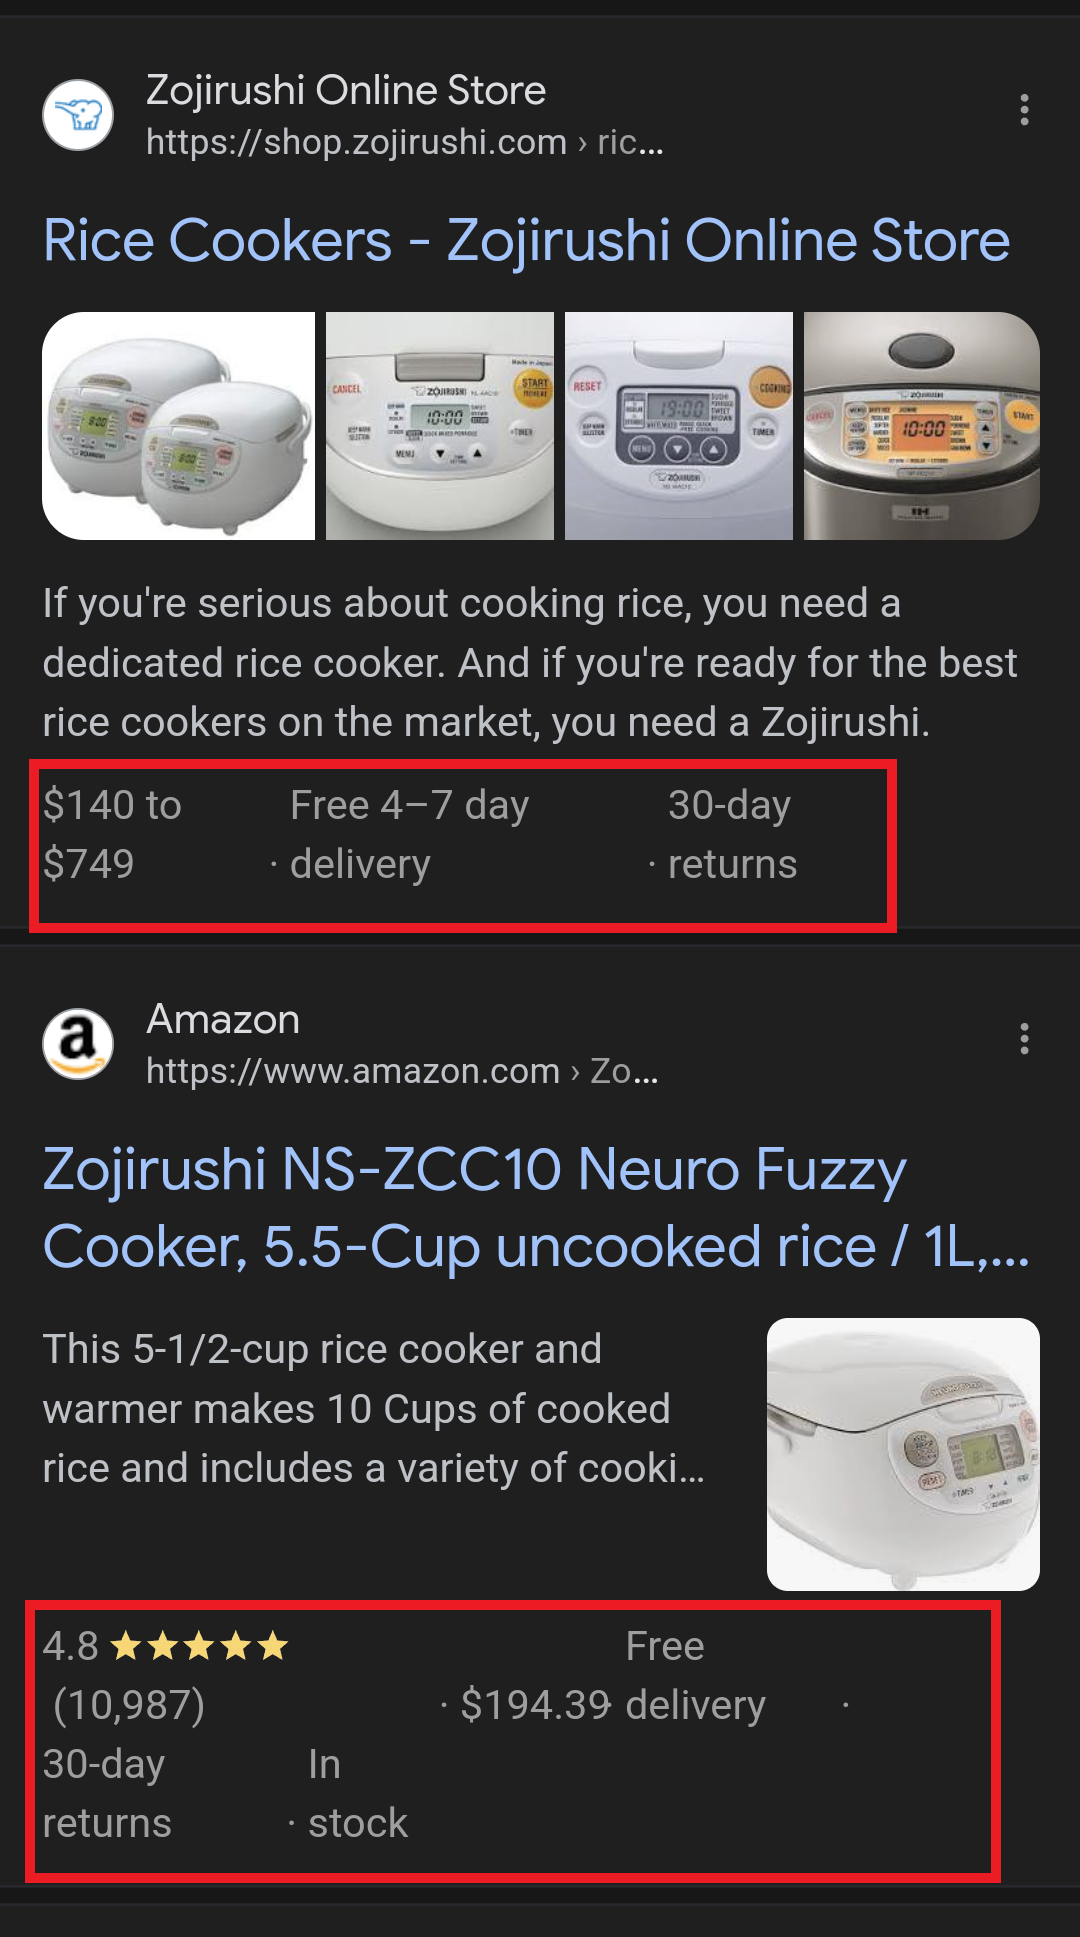 An image of a search result for Japanese rice cookers that shows rich results for Zojirushi and Amazon.